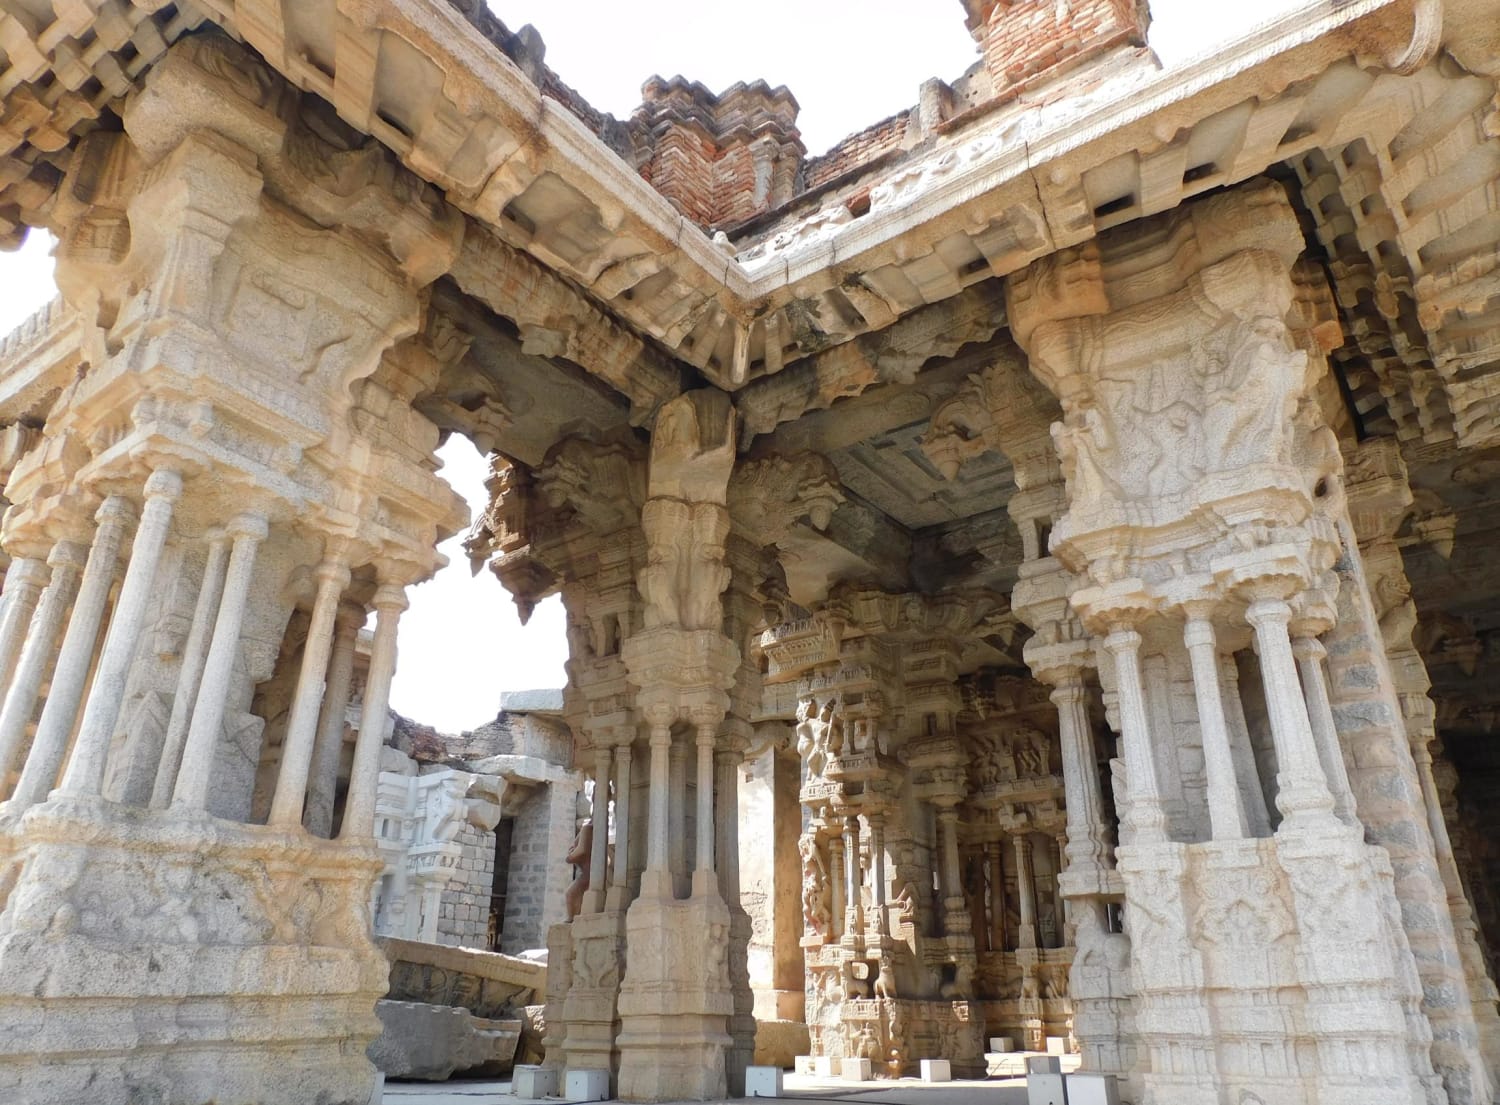 The pillars of the Vitthala Temple in Hampi, India, can produce musical notes (Sa, Ri, Ga, Ma—four of the seven notes according to Indian classical music) when gently tapped